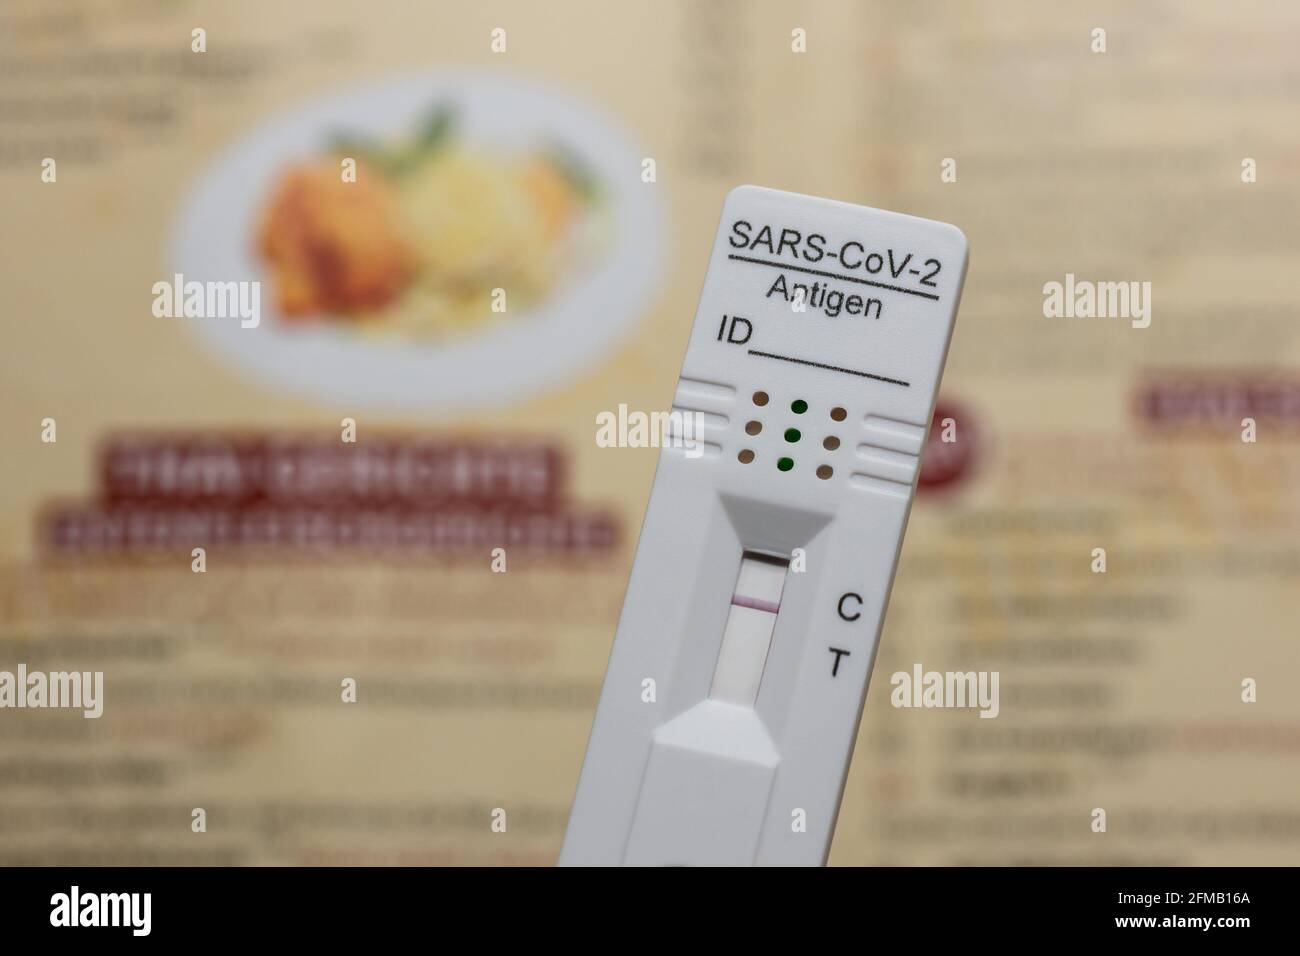 Testing Before Going To A Restaurant: Rapid Antigen Corona Test Showing A Negative Result In Front of A Menu, Berlin, Germany Stock Photo